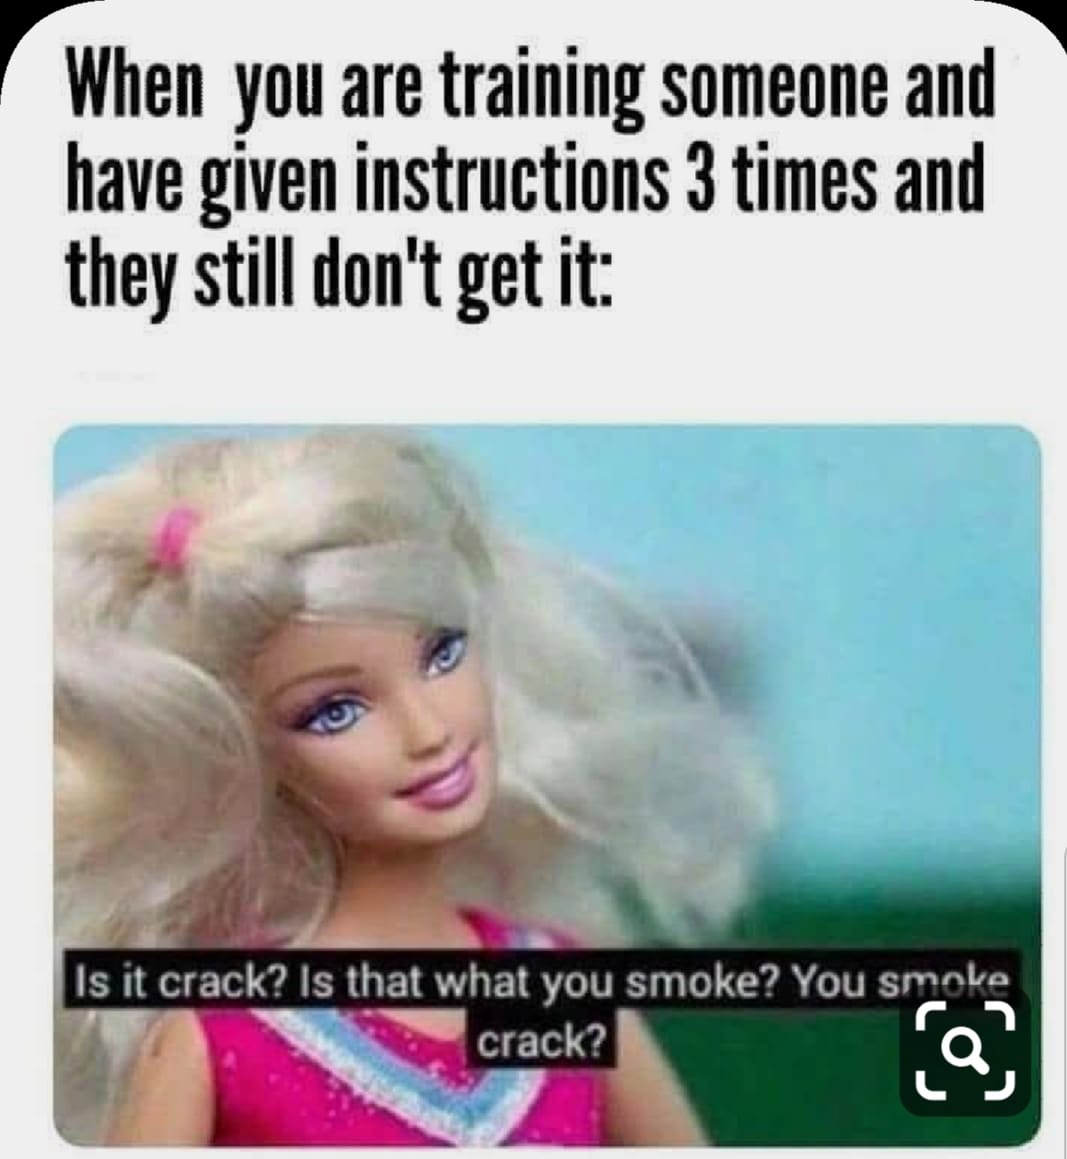 crack is that what you re - When you are training someone and have given instructions 3 times and they still don't get it Is it crack? Is that what you smoke? You smoke crack?